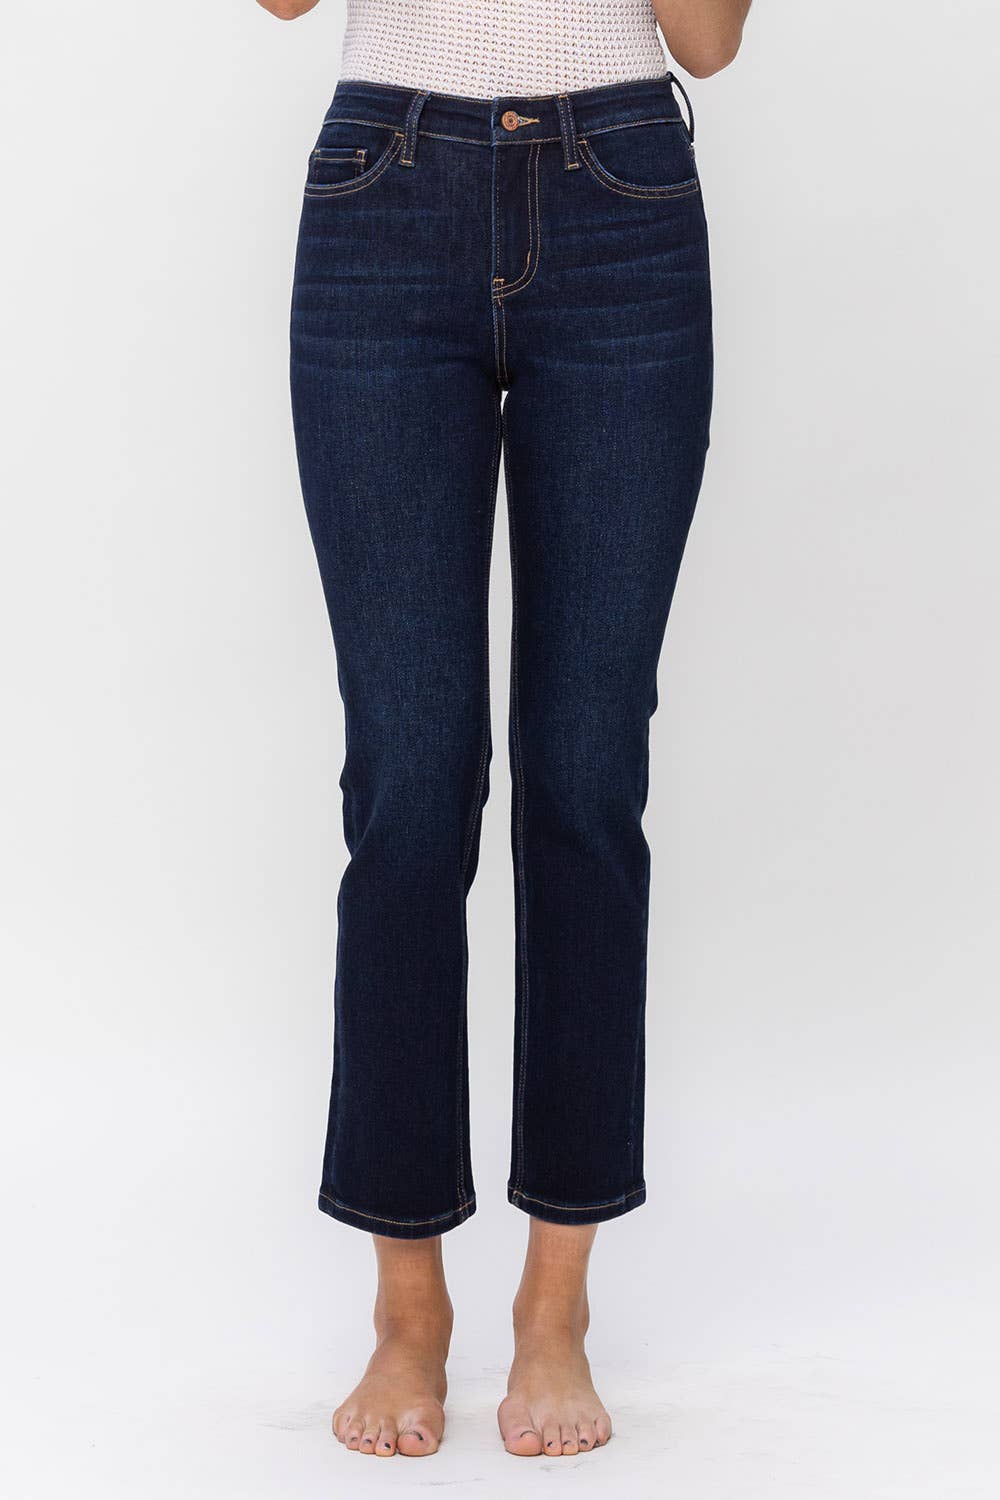 The Nola Ankle Jean